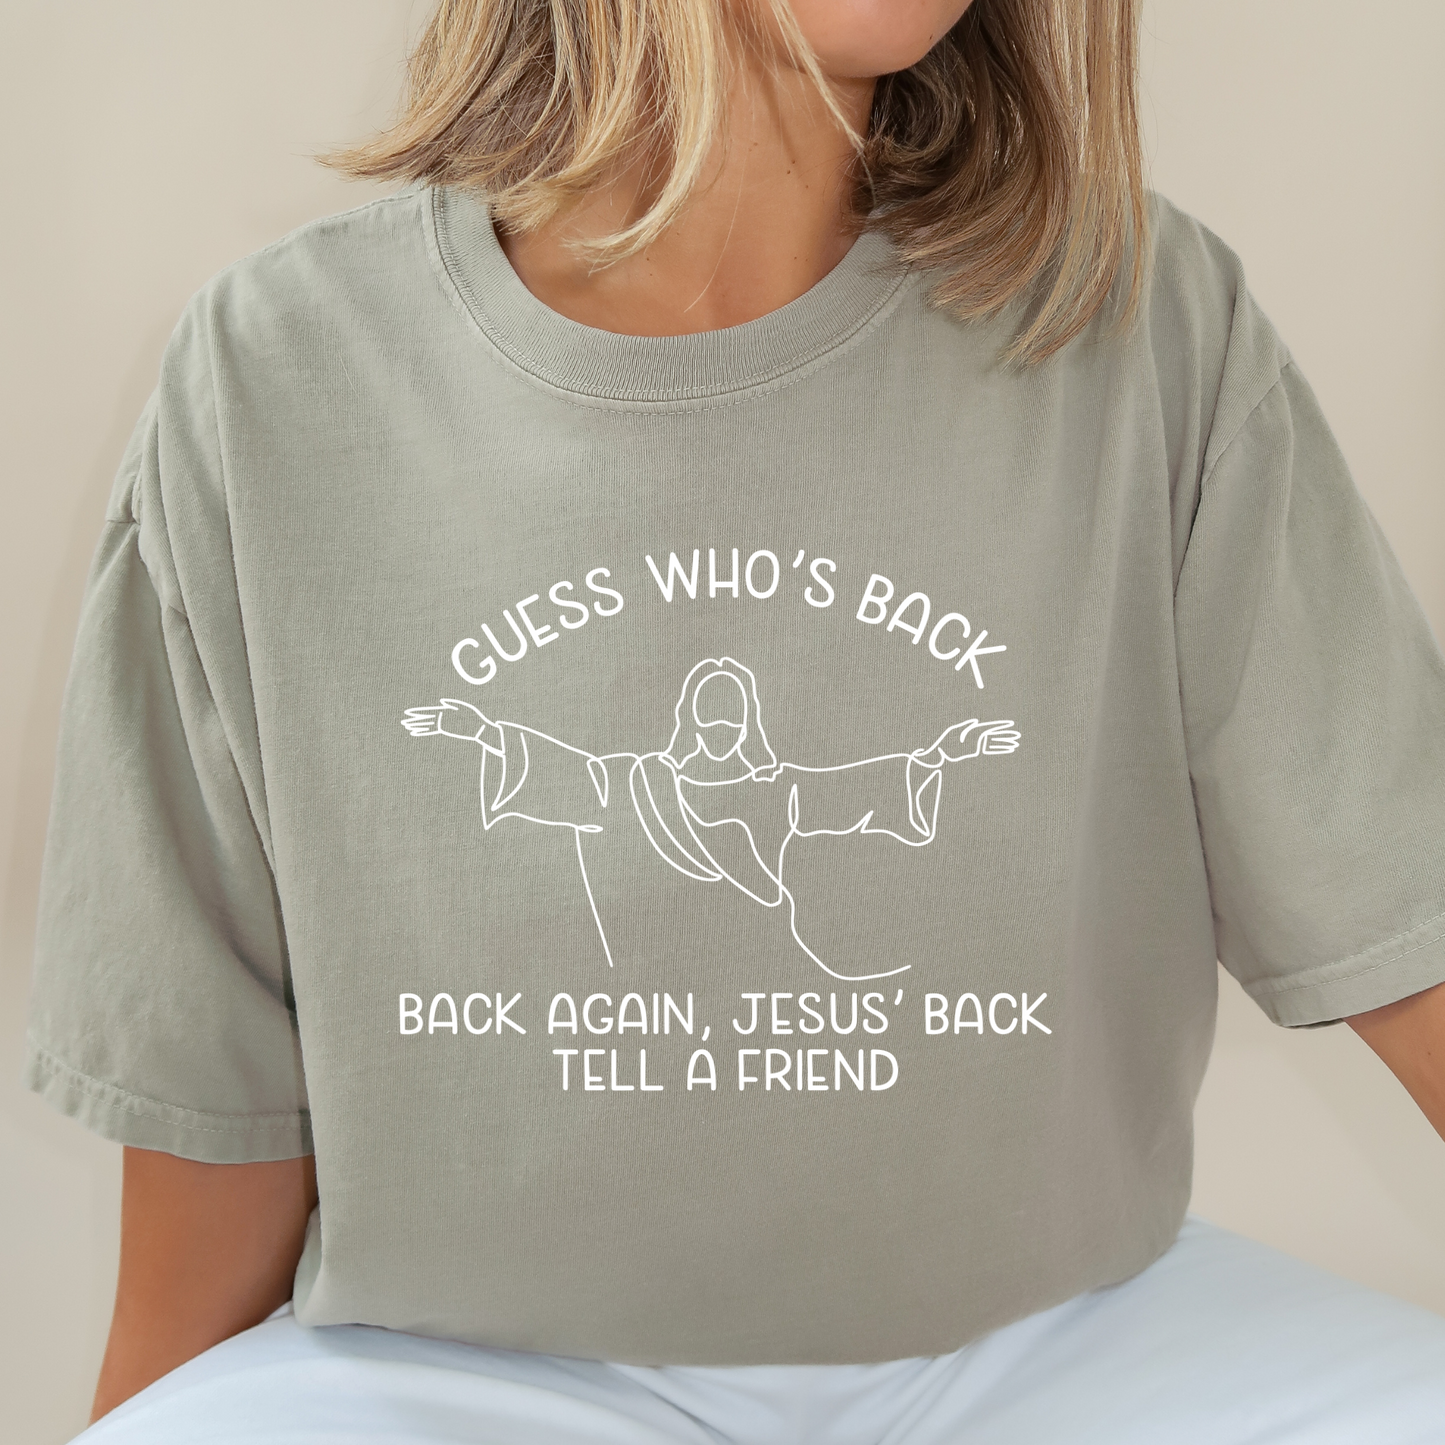 Guess Who's Back | Comfort Colors Ring-Spun Cotton | He Found Me | Christian Bible Verse Tee